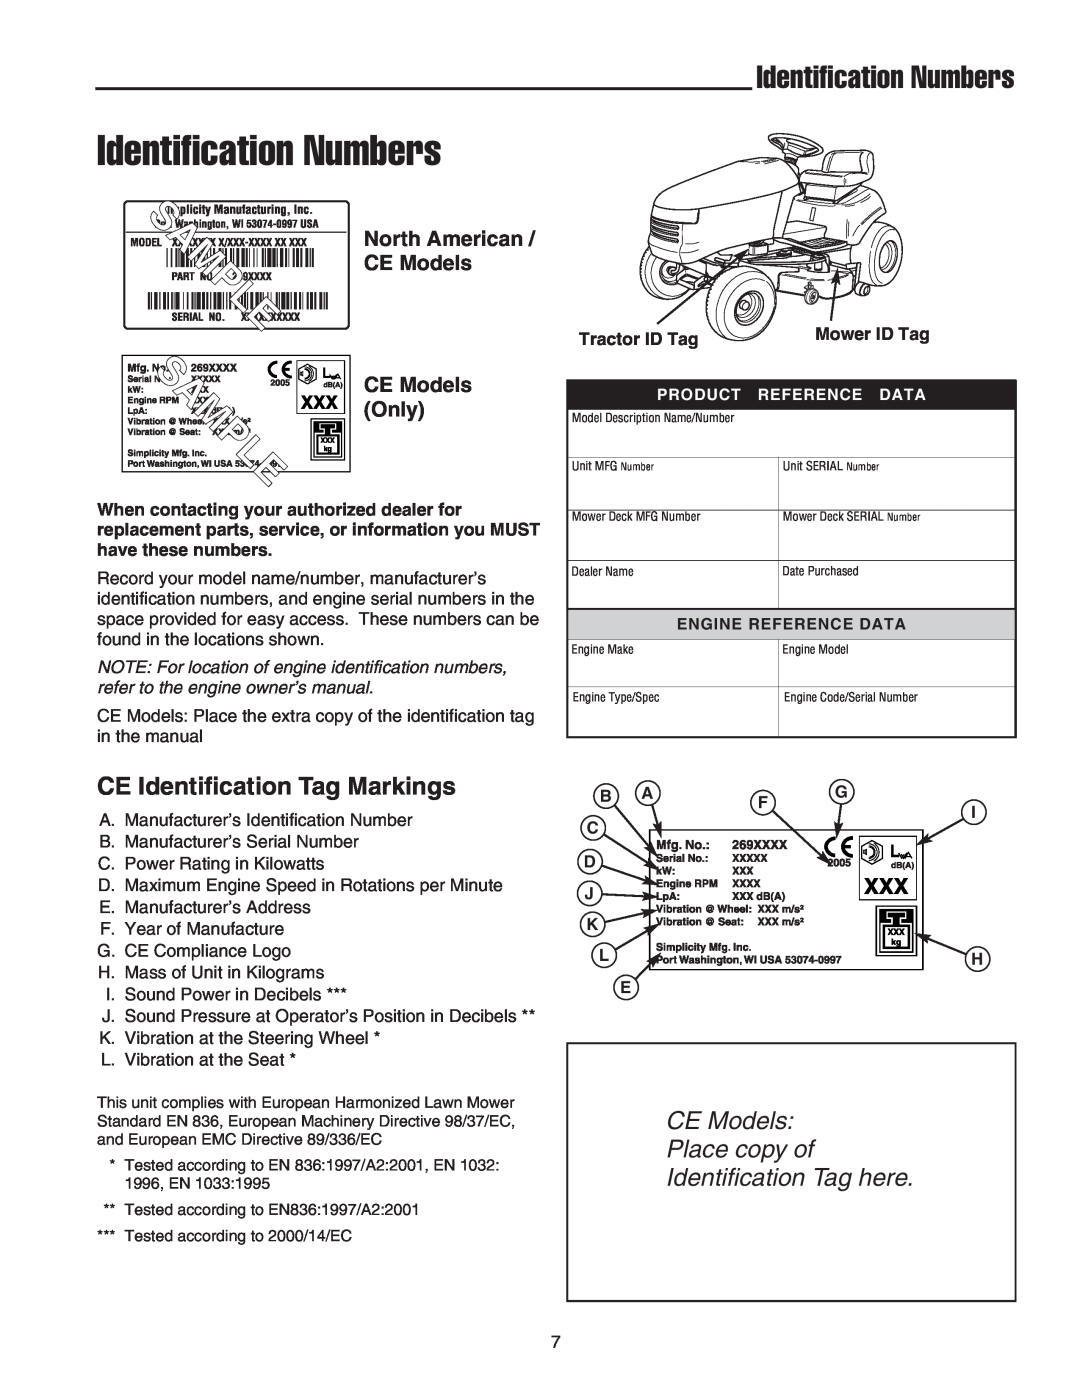 Snapper LT-200 manual Identification Numbers 